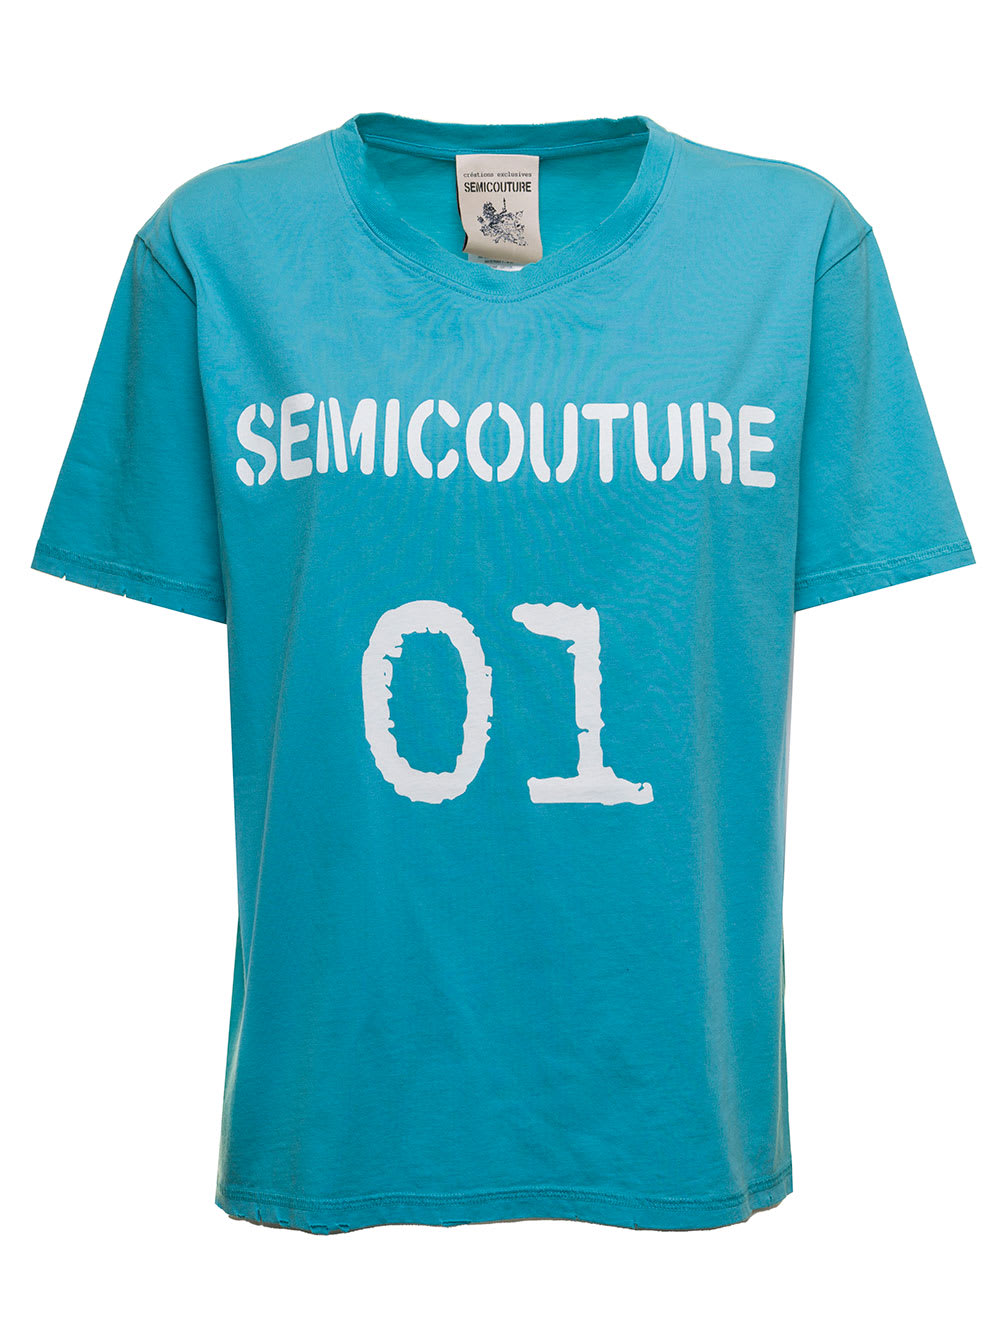 Semicouture Womans Light Blue Cotton T-shirt With Logo Print